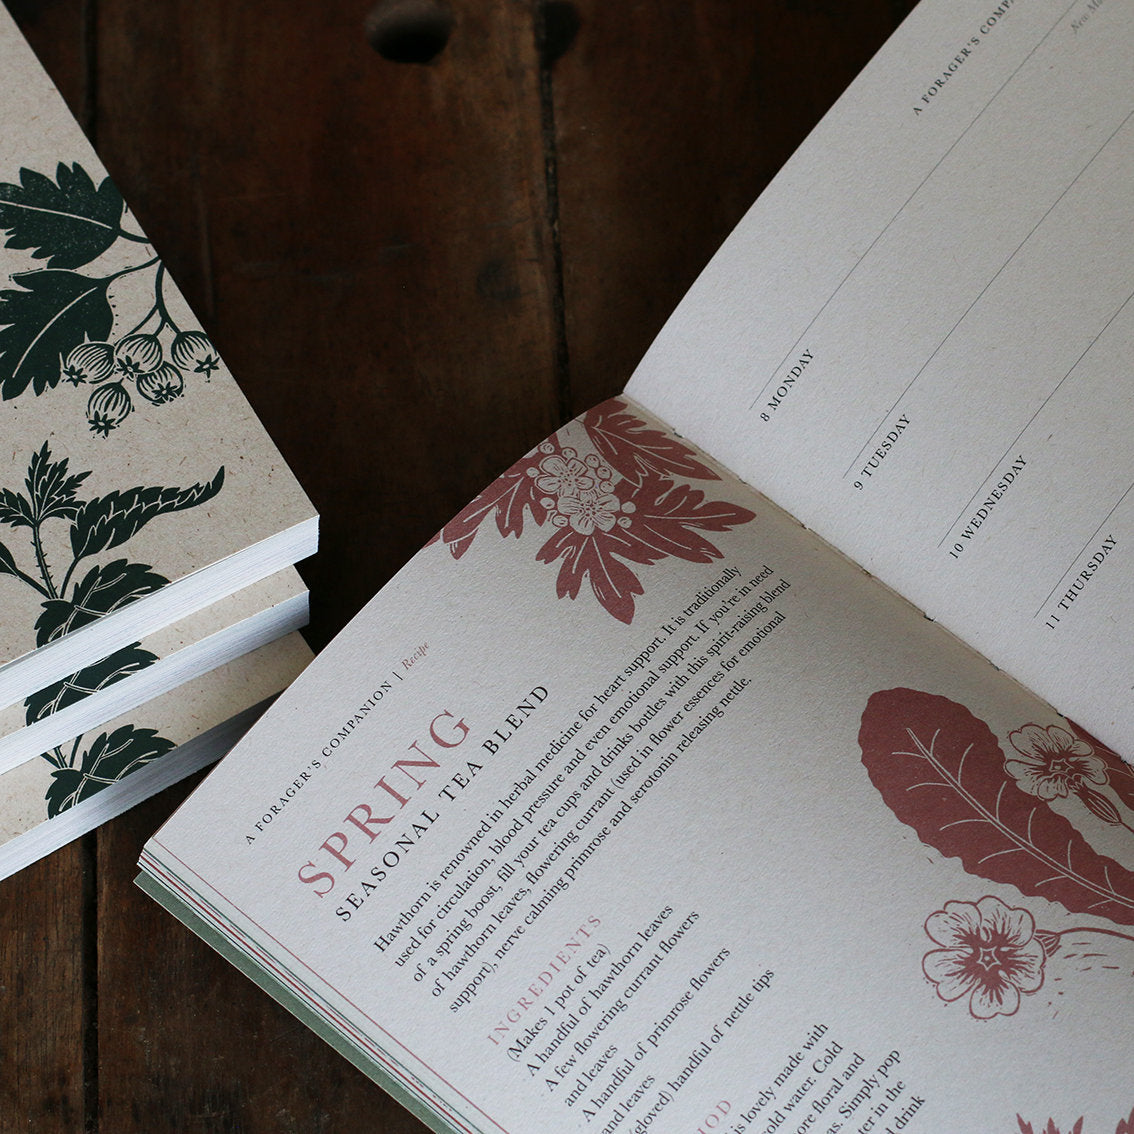 A Forager's Companion - 2024 Diary by Isla Middleton